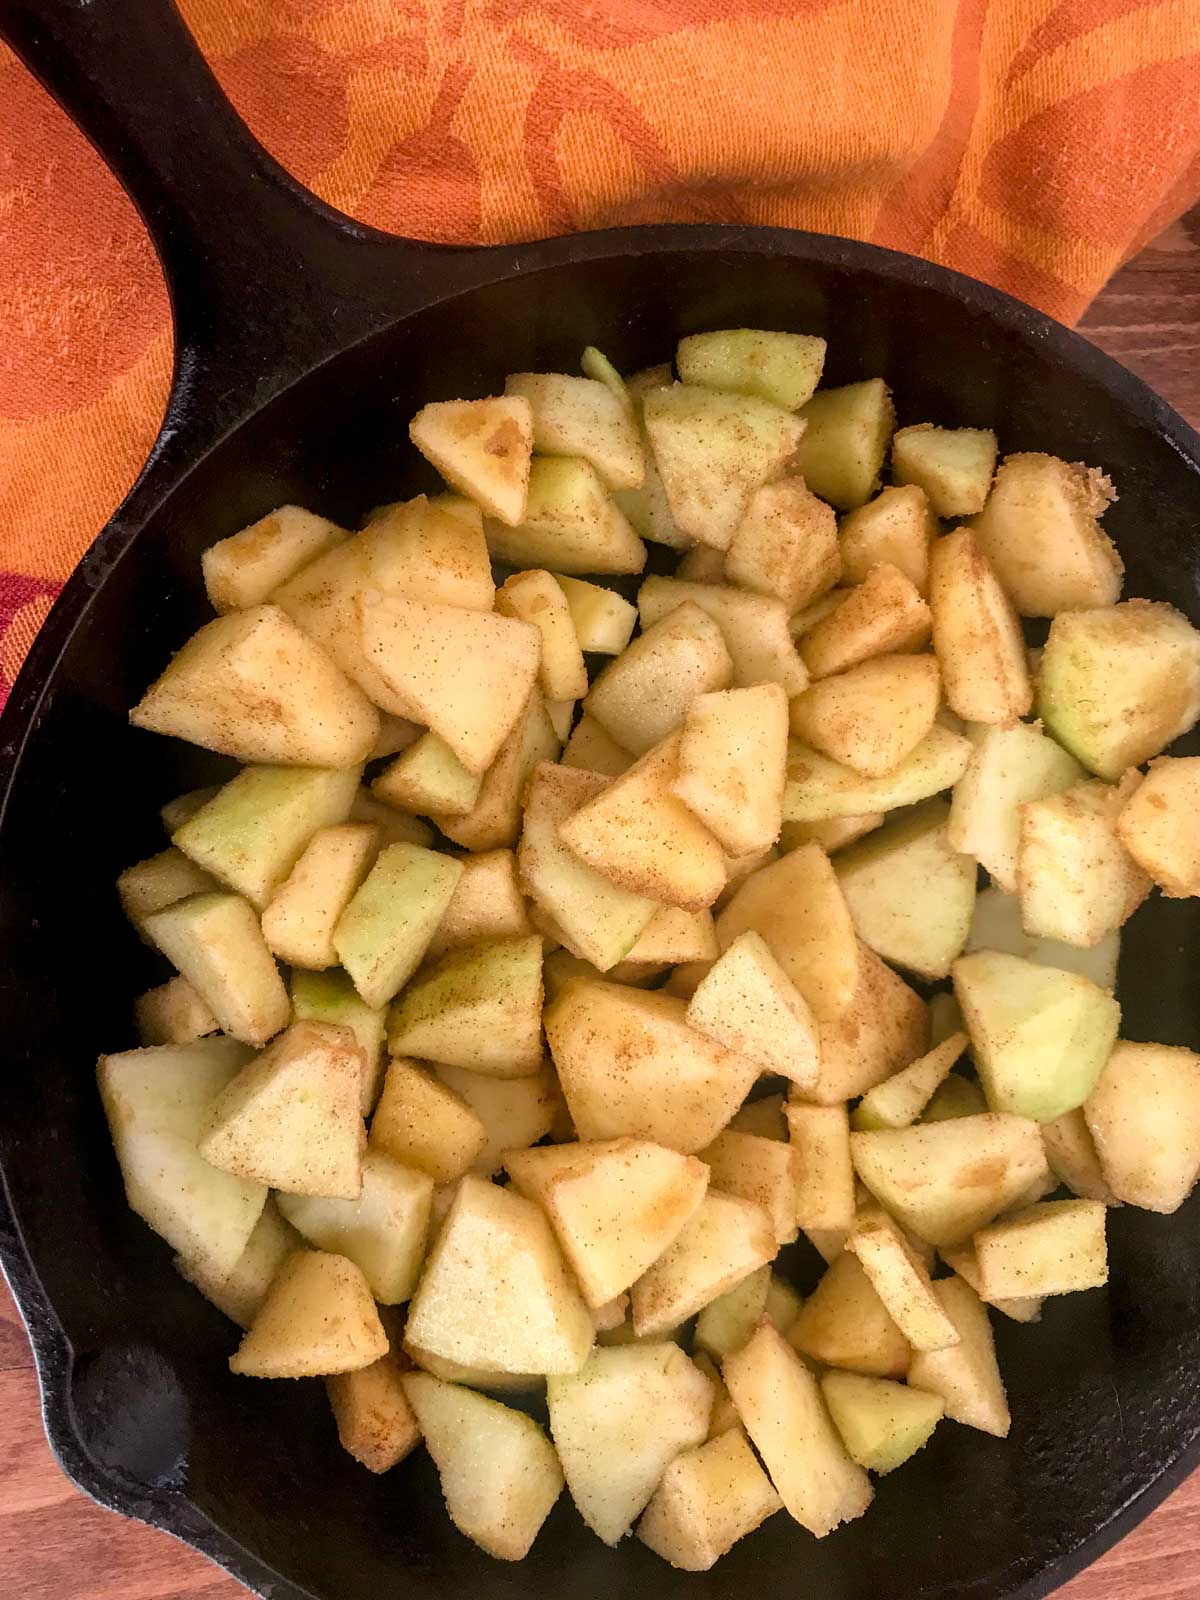 Diced apples in a cast-iron skillet